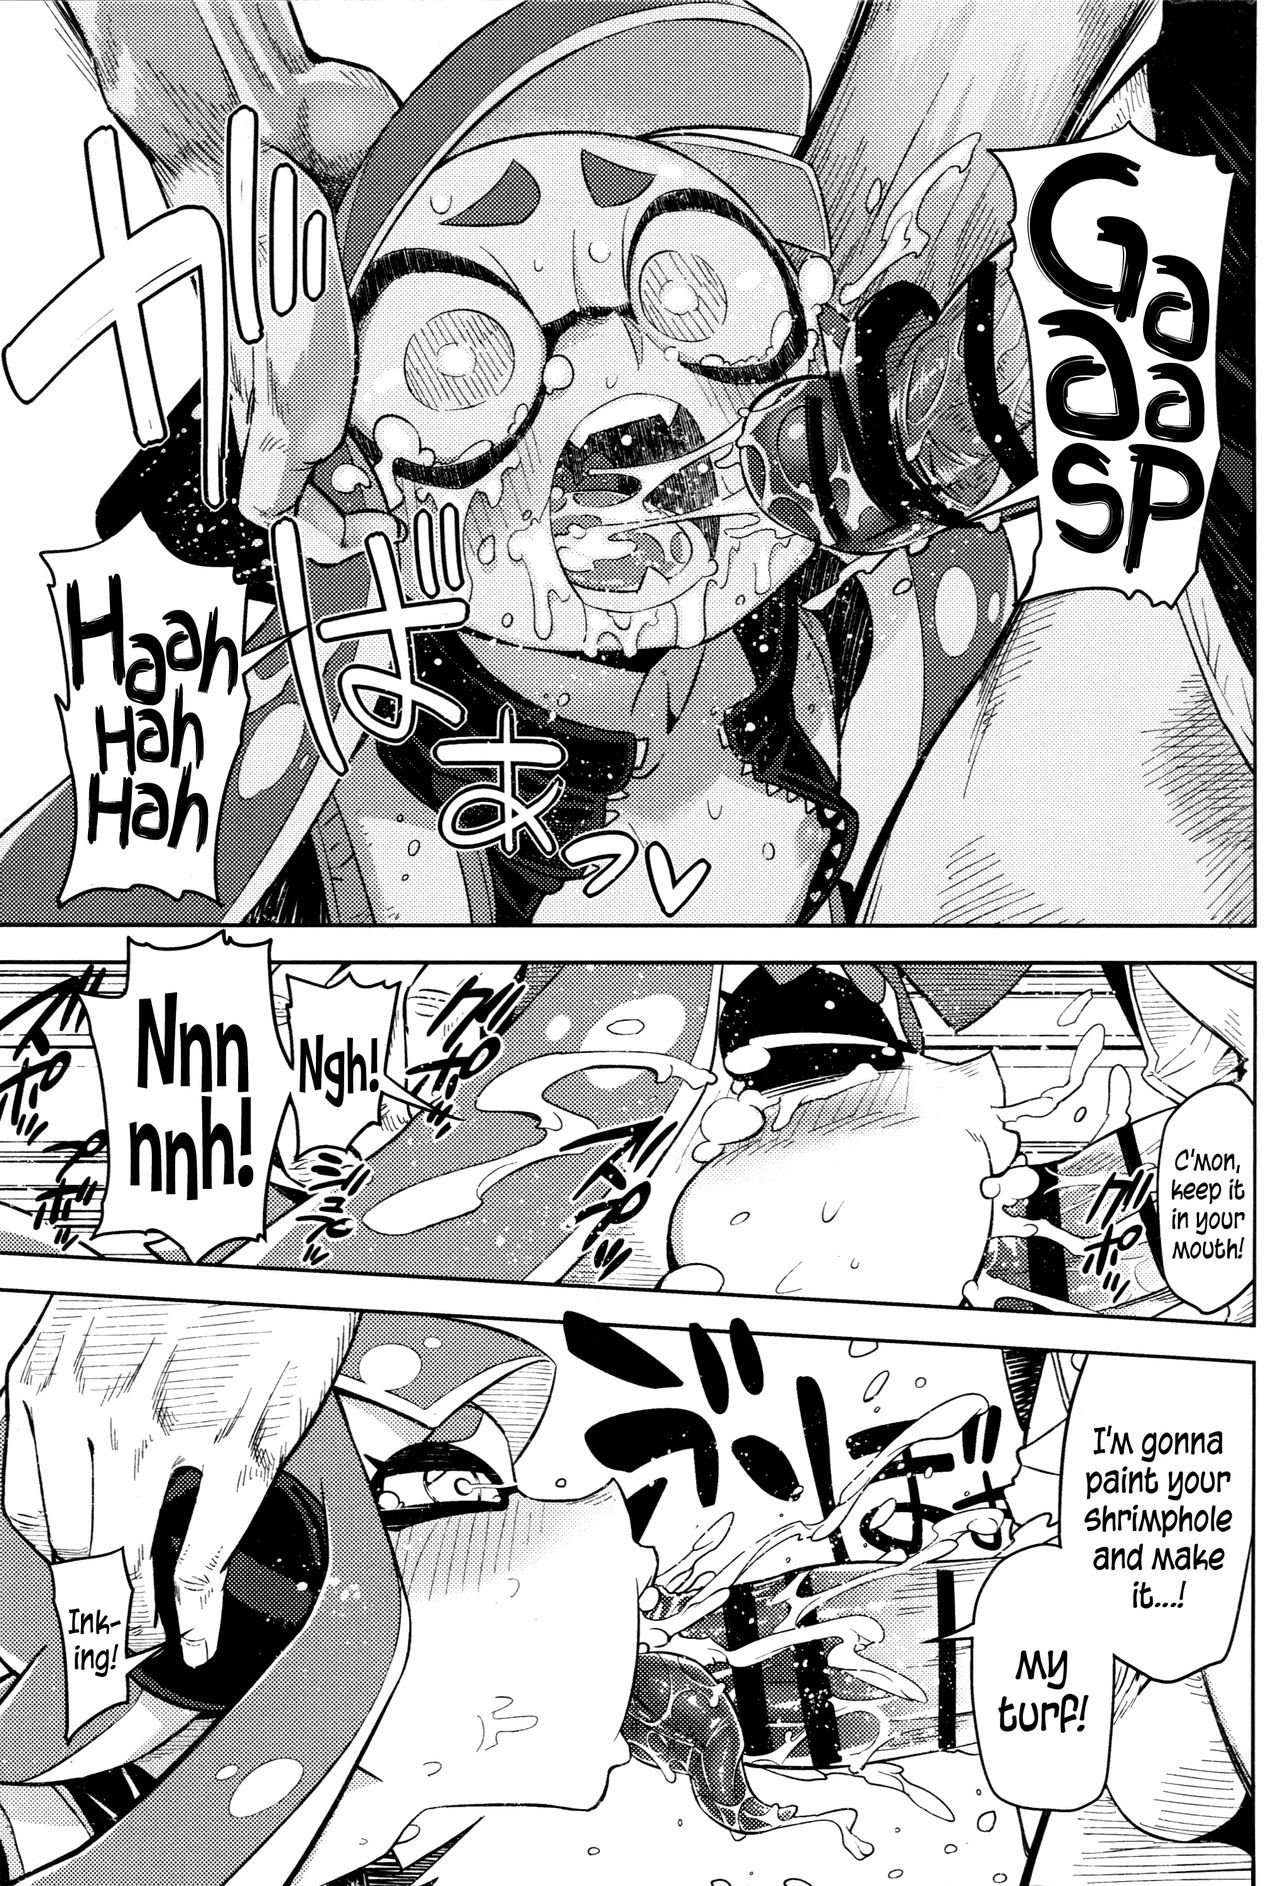 Hero by a Hair's Breadth hentai manga picture 13